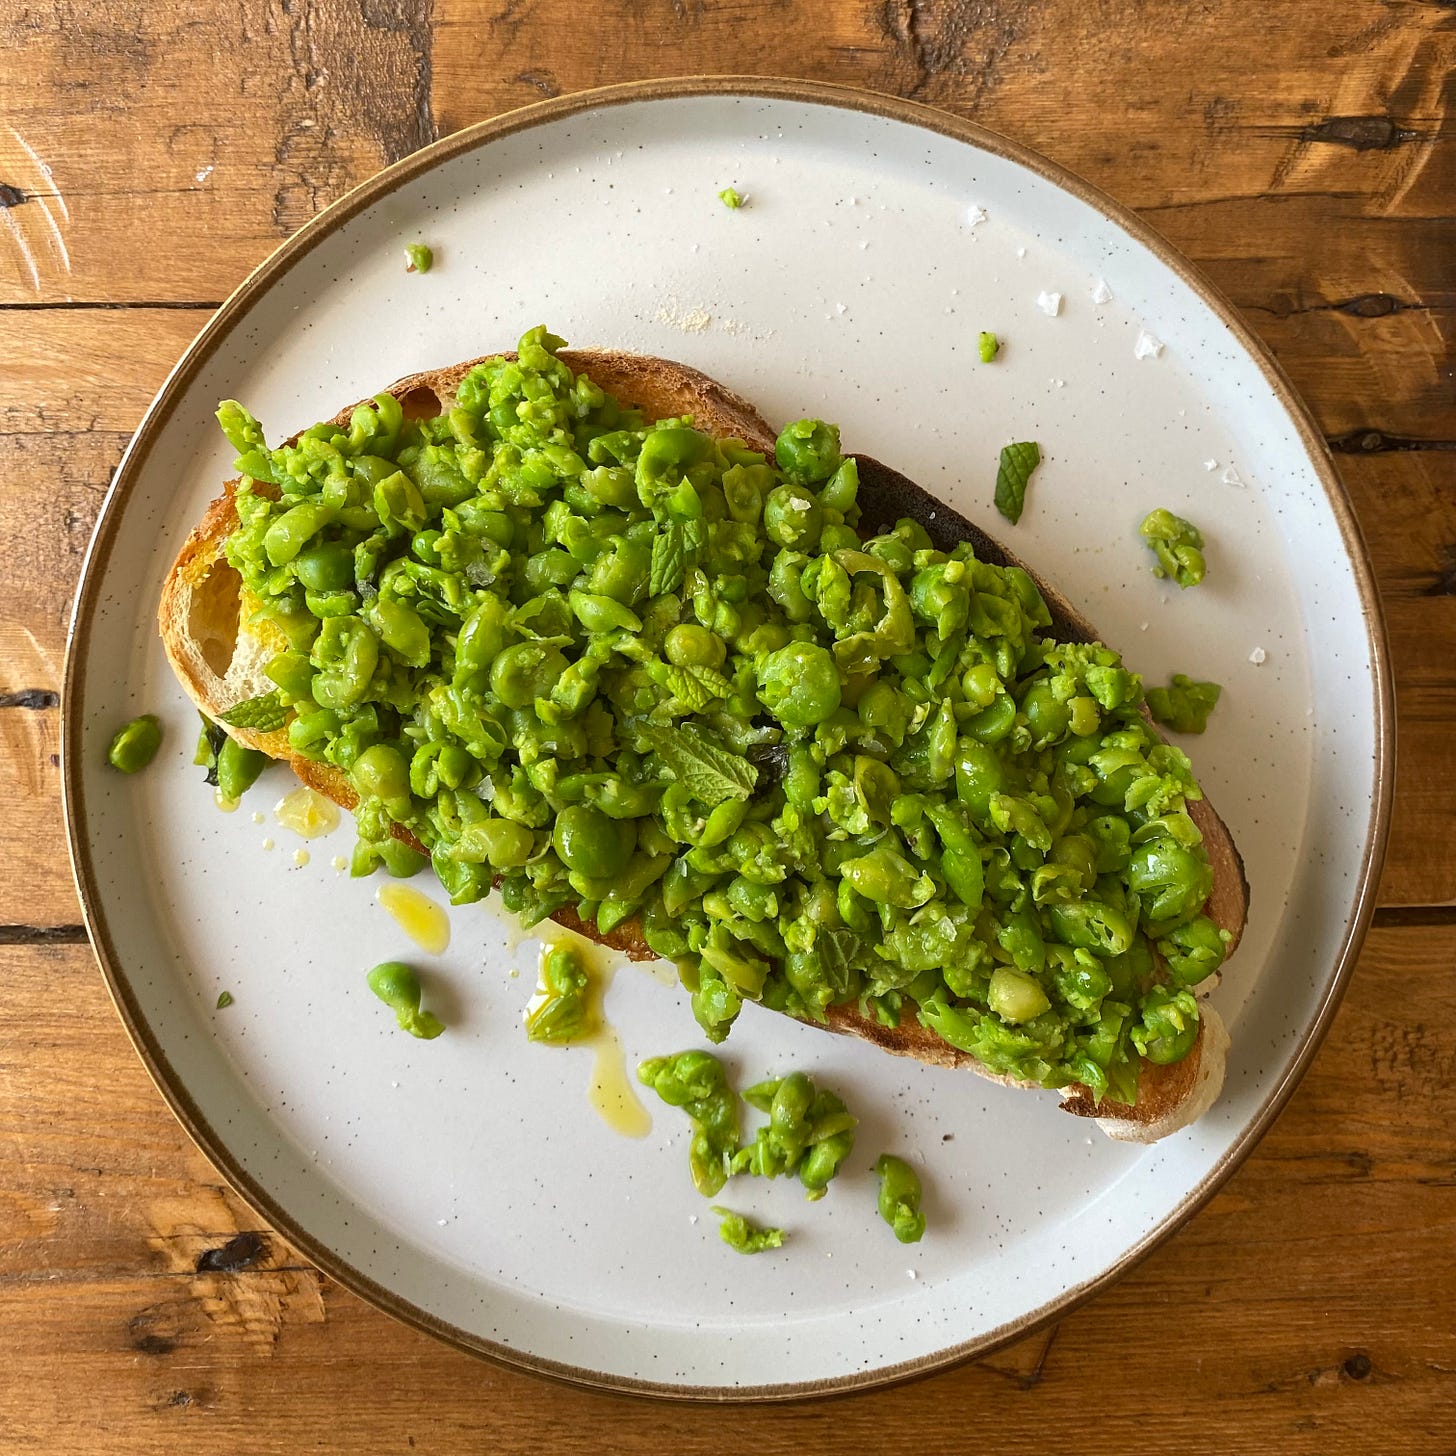 slice of toast topped with smashed peas drizzled with oil and torn mint leaves